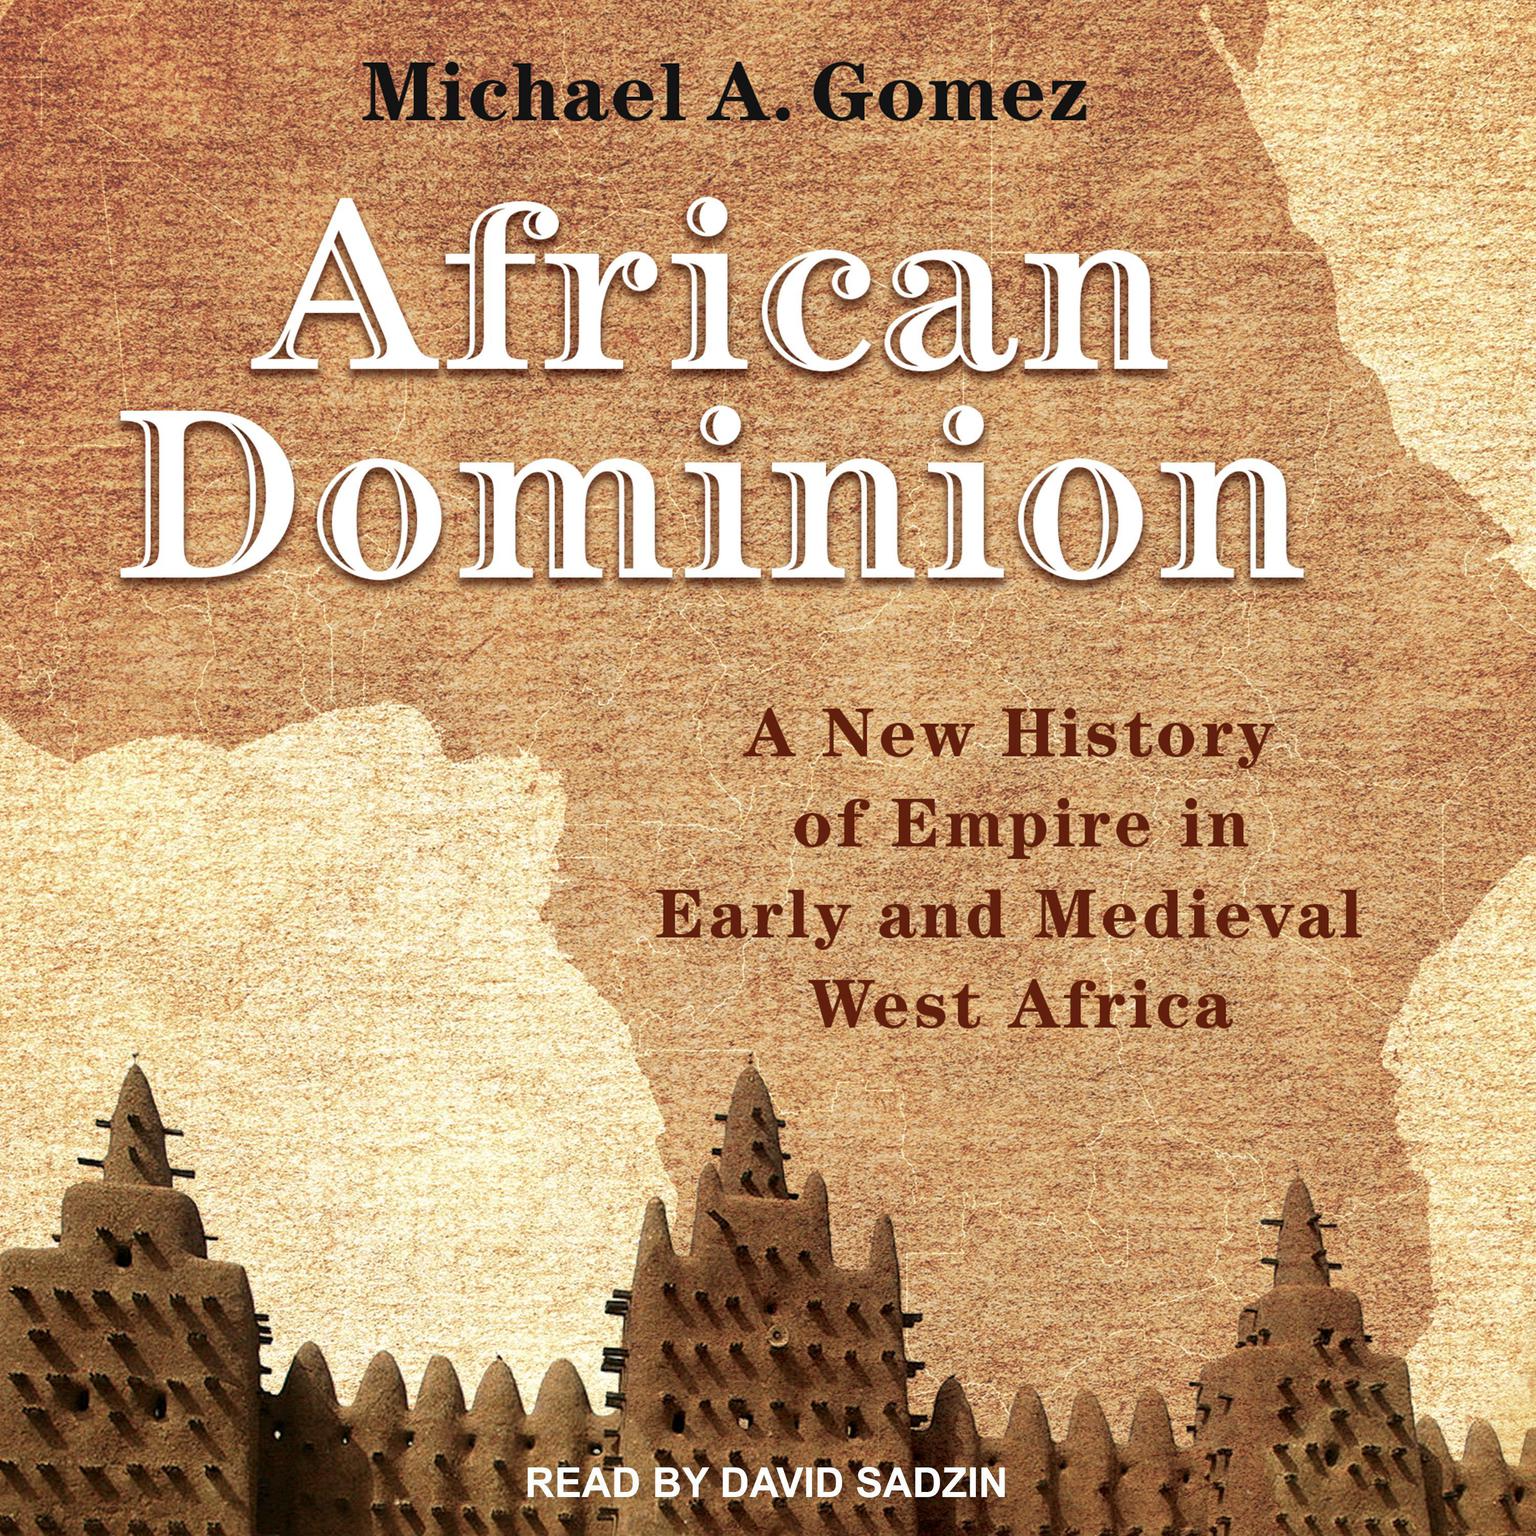 African Dominion: A New History of Empire in Early and Medieval West Africa Audiobook, by Michael Gomez